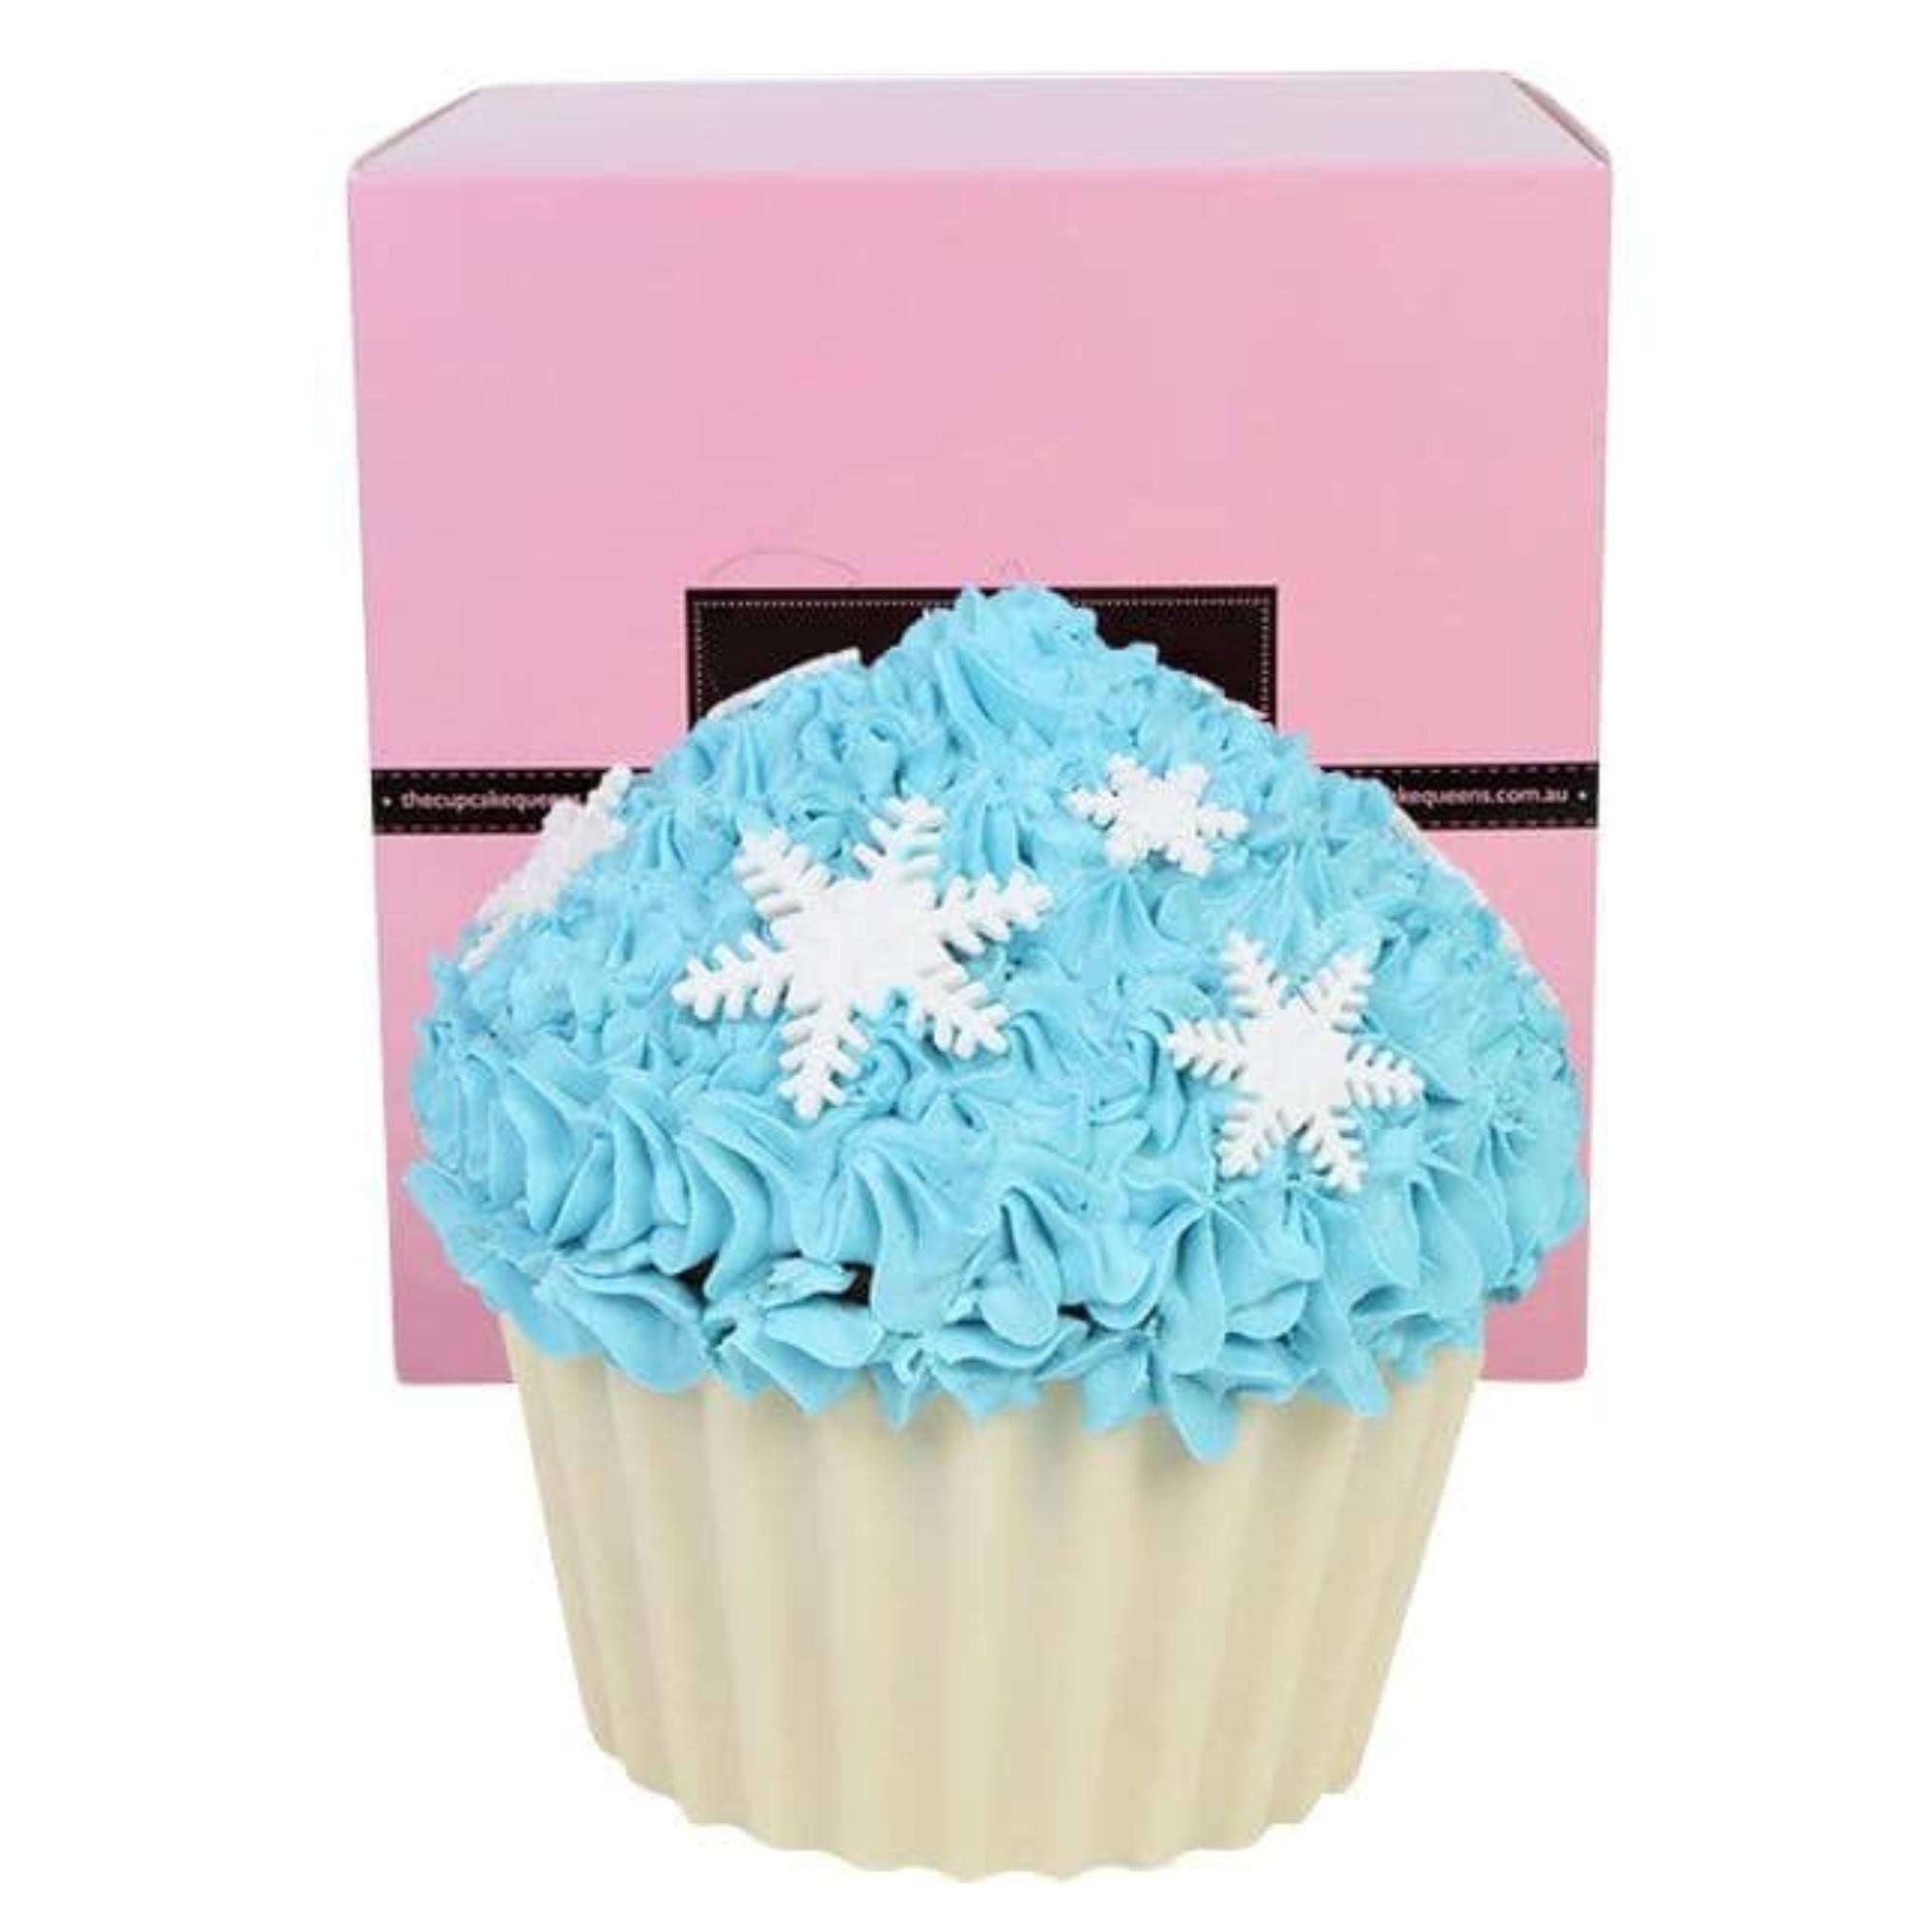 Frozen Blue Vanilla Giant Cupcake with Snowflakes Cakes The Cupcake Queens 